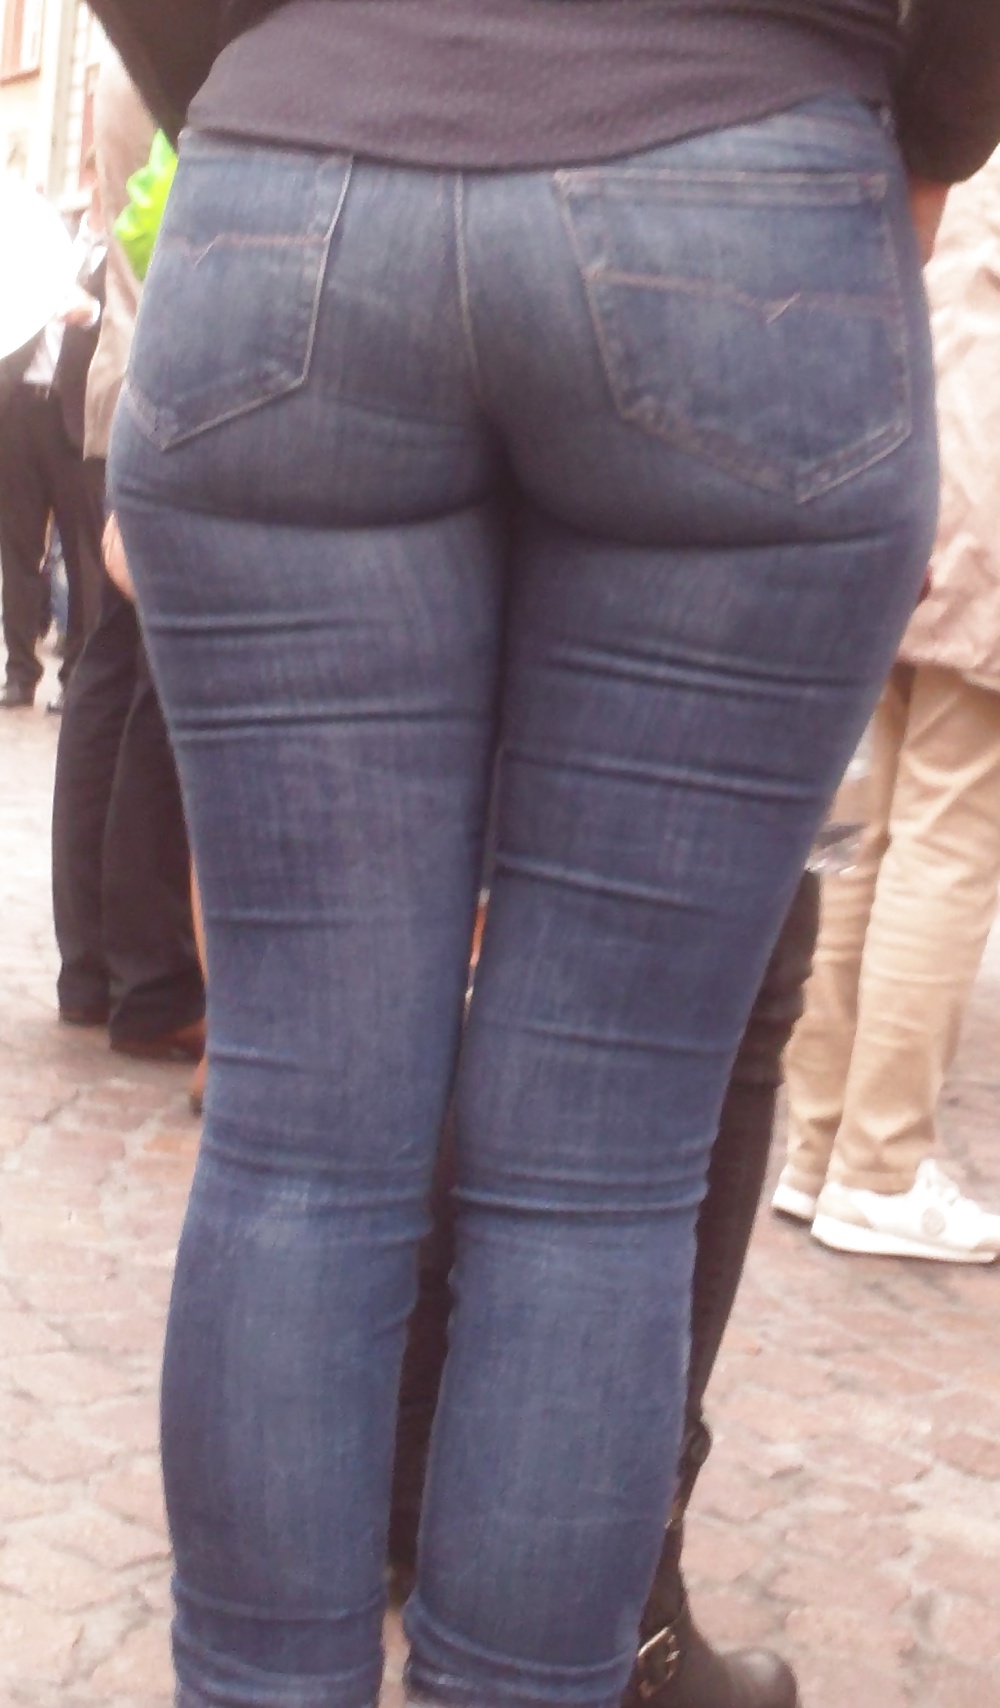 Nice big juicy teen ass & butt in very tight blue jeans  #31832227